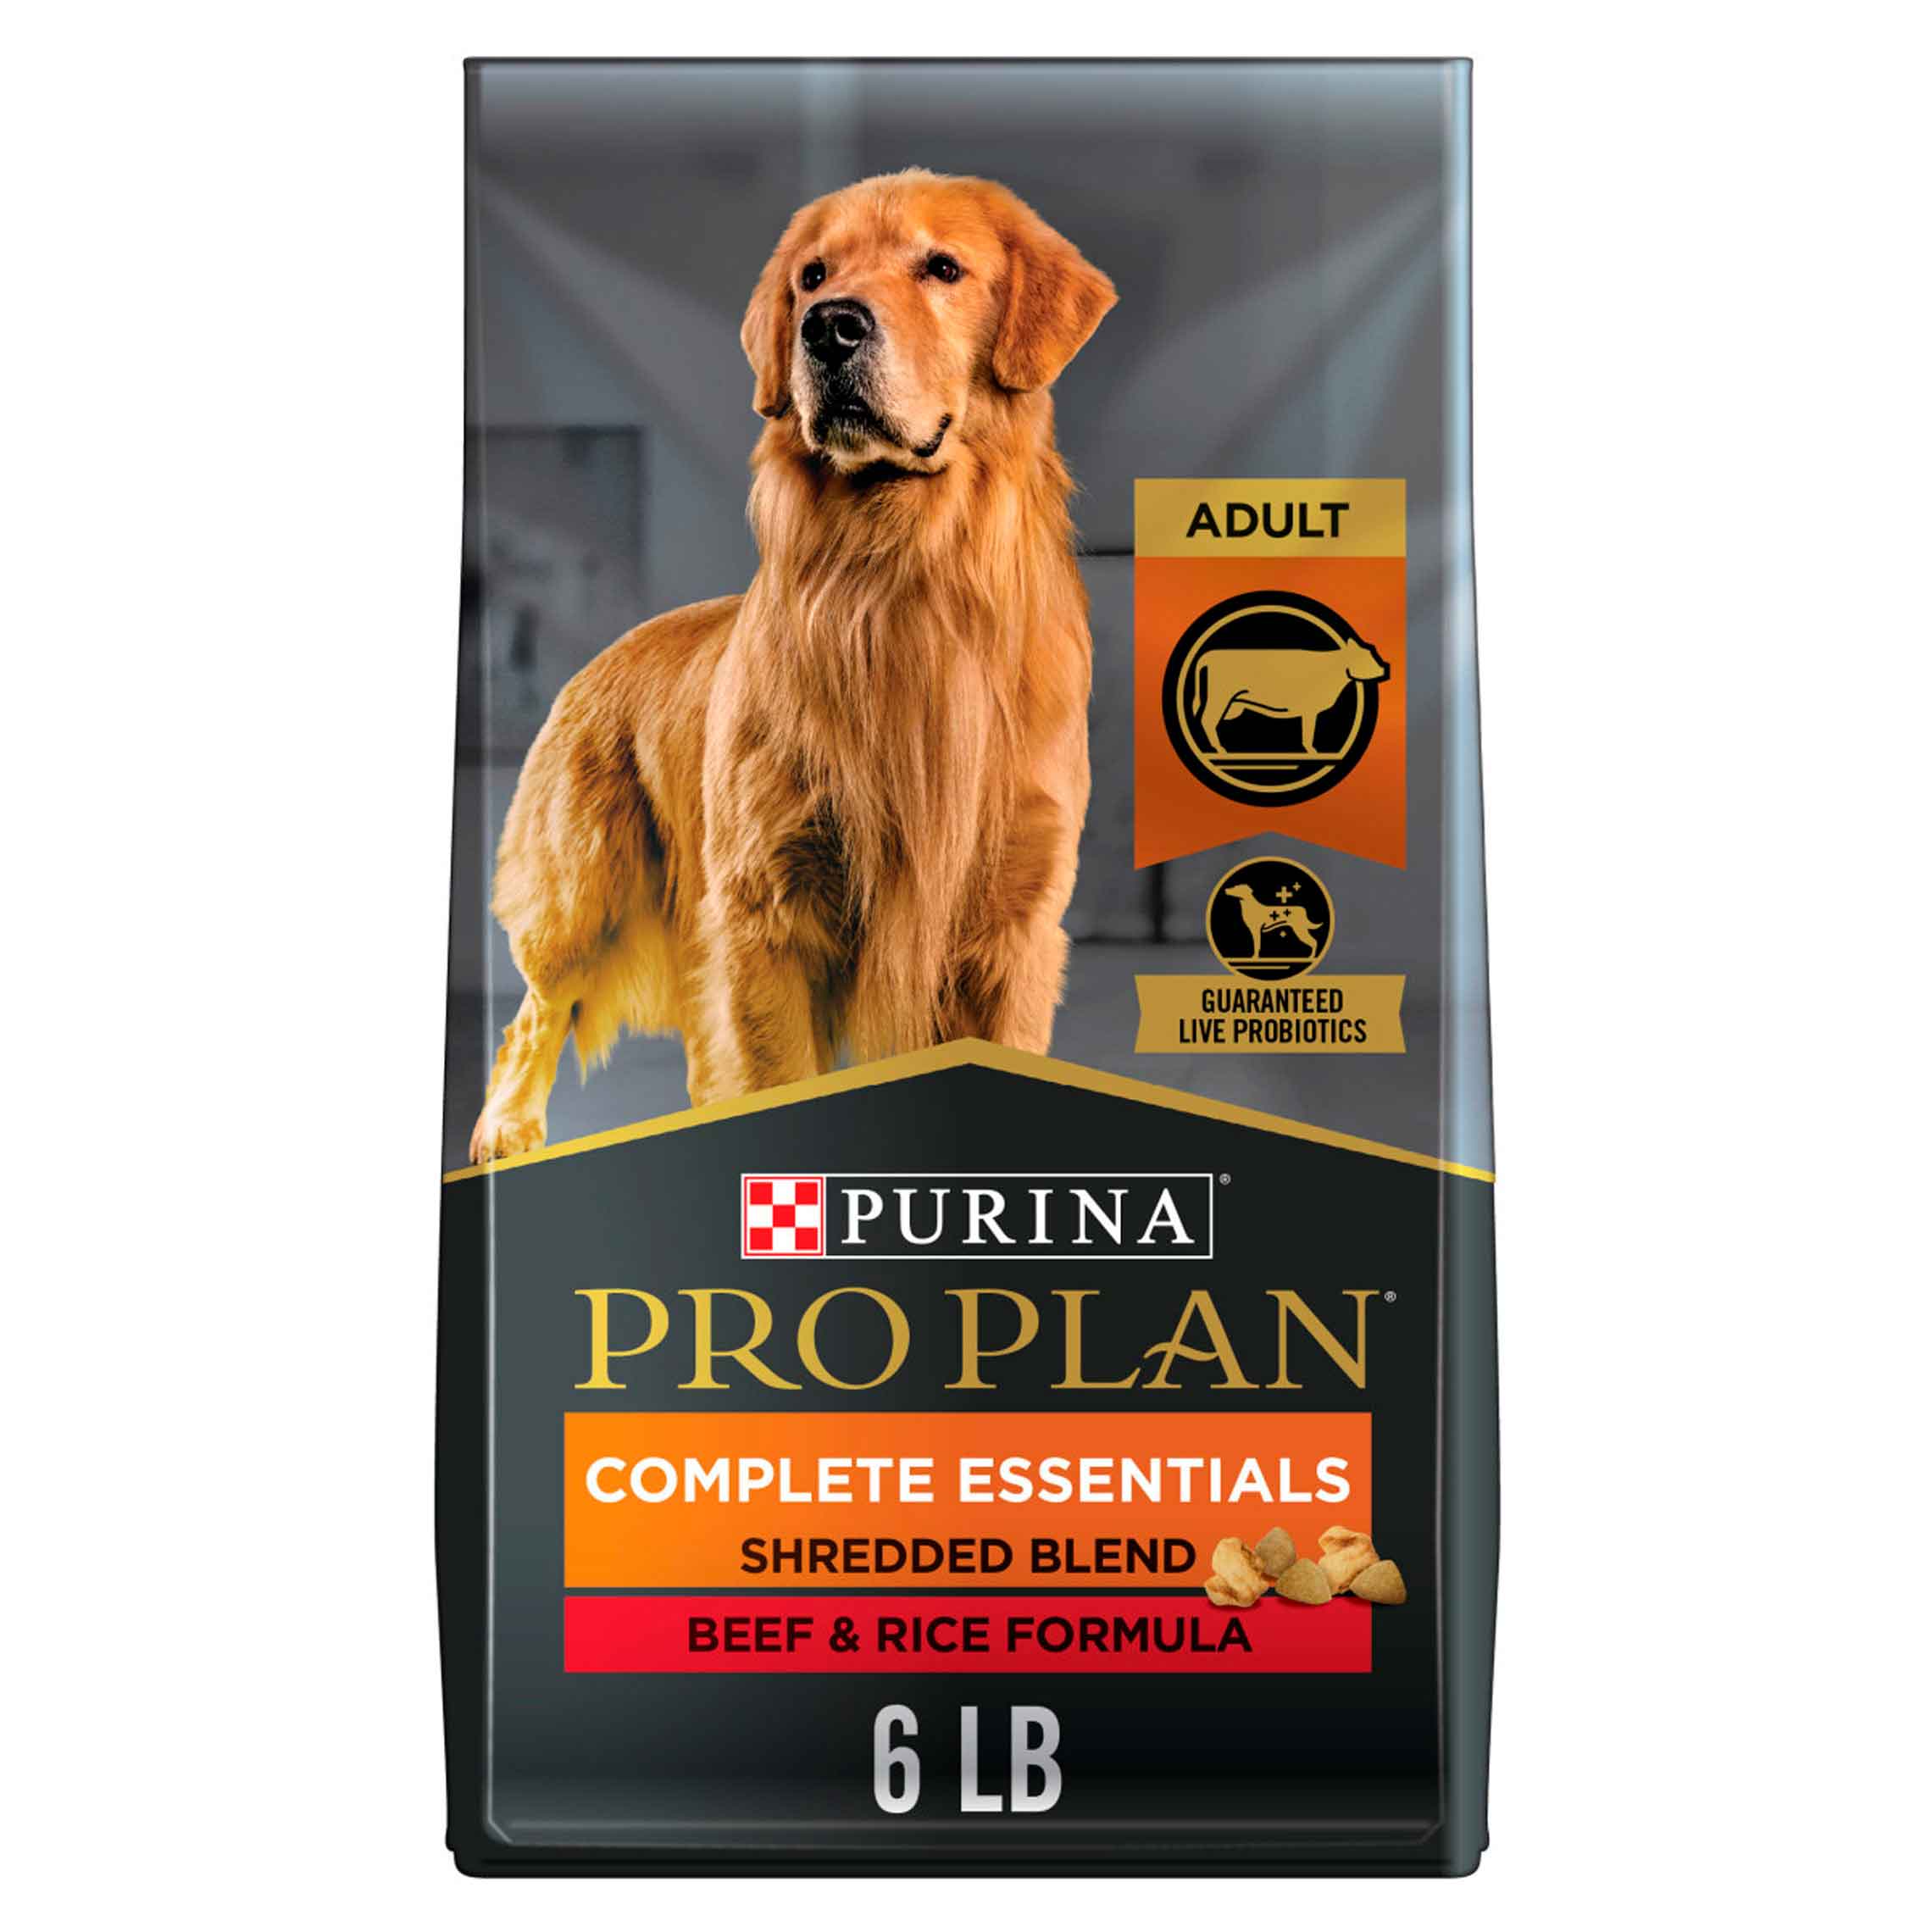 Purina Pro Plan High Protein Dog Food With Probiotics for Dogs, Shredded Blend Beef & Rice Formula - 6 Pound Bag